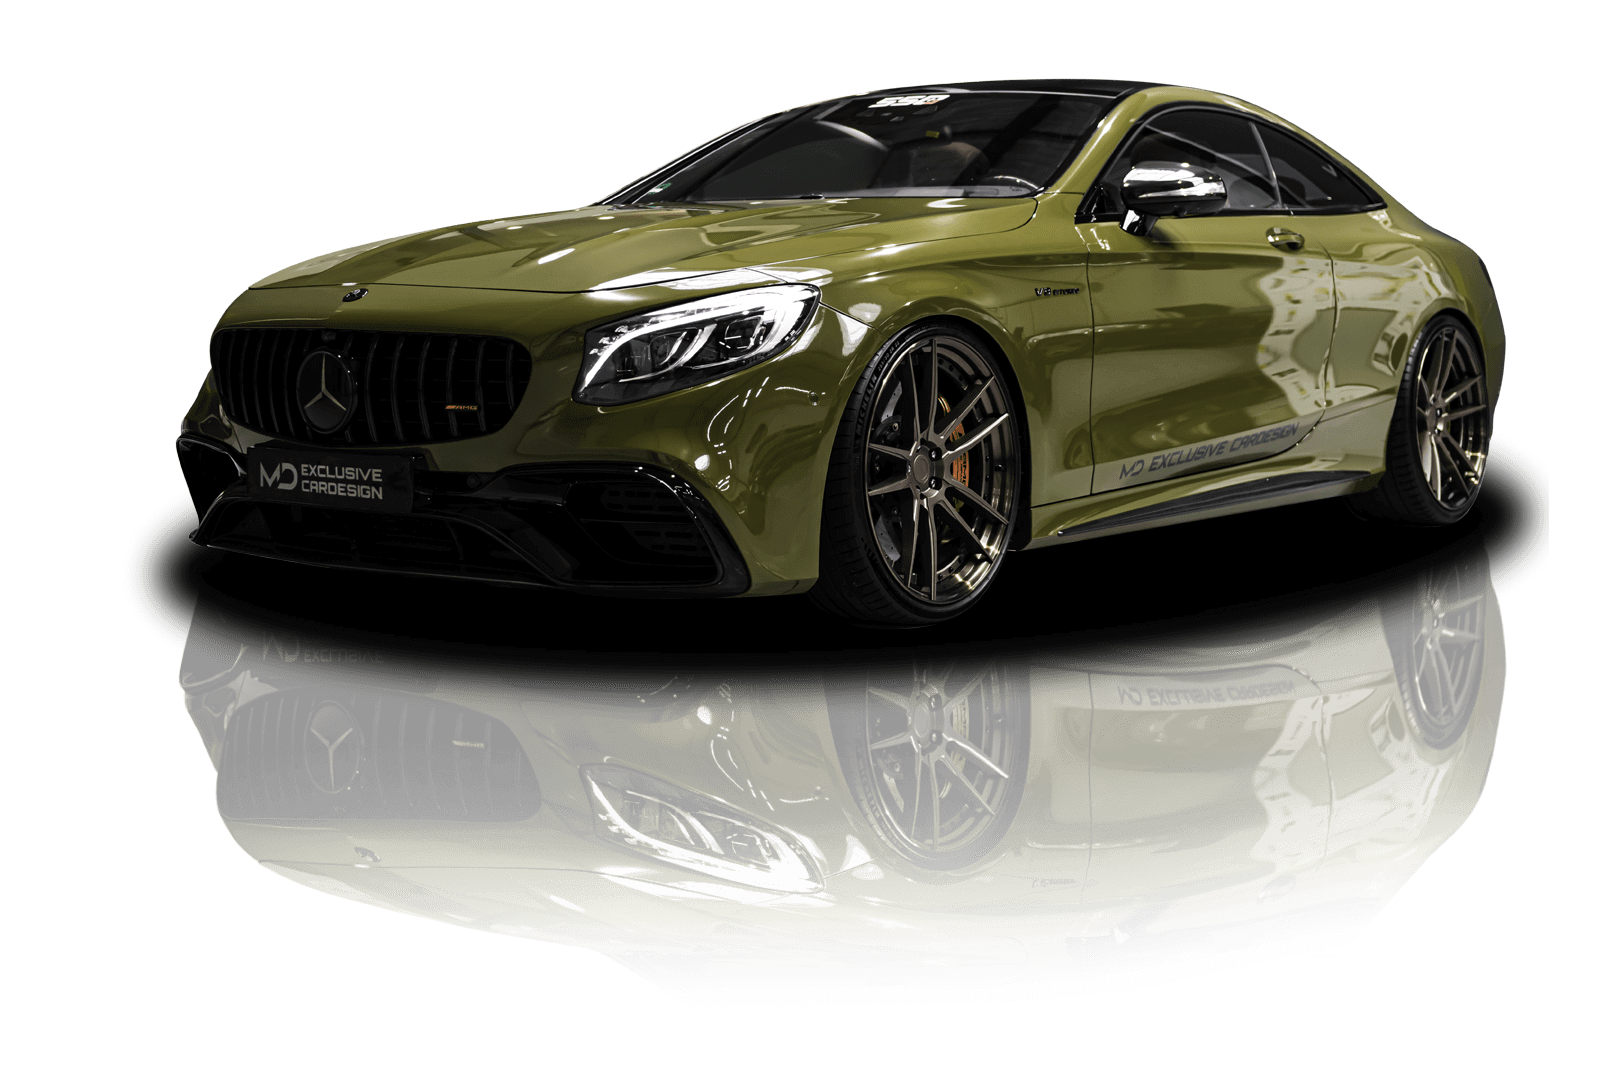 https://wrapping.md-exclusive-cardesign.com/wp-content/uploads/2021/10/Mercedes-AMG-S63-Coupe%CC%81-C217-Folierung-in-PWF-Badlands-Green-CC-4165-MD-exclusive-cardesign-Autofolierung-NRW.png